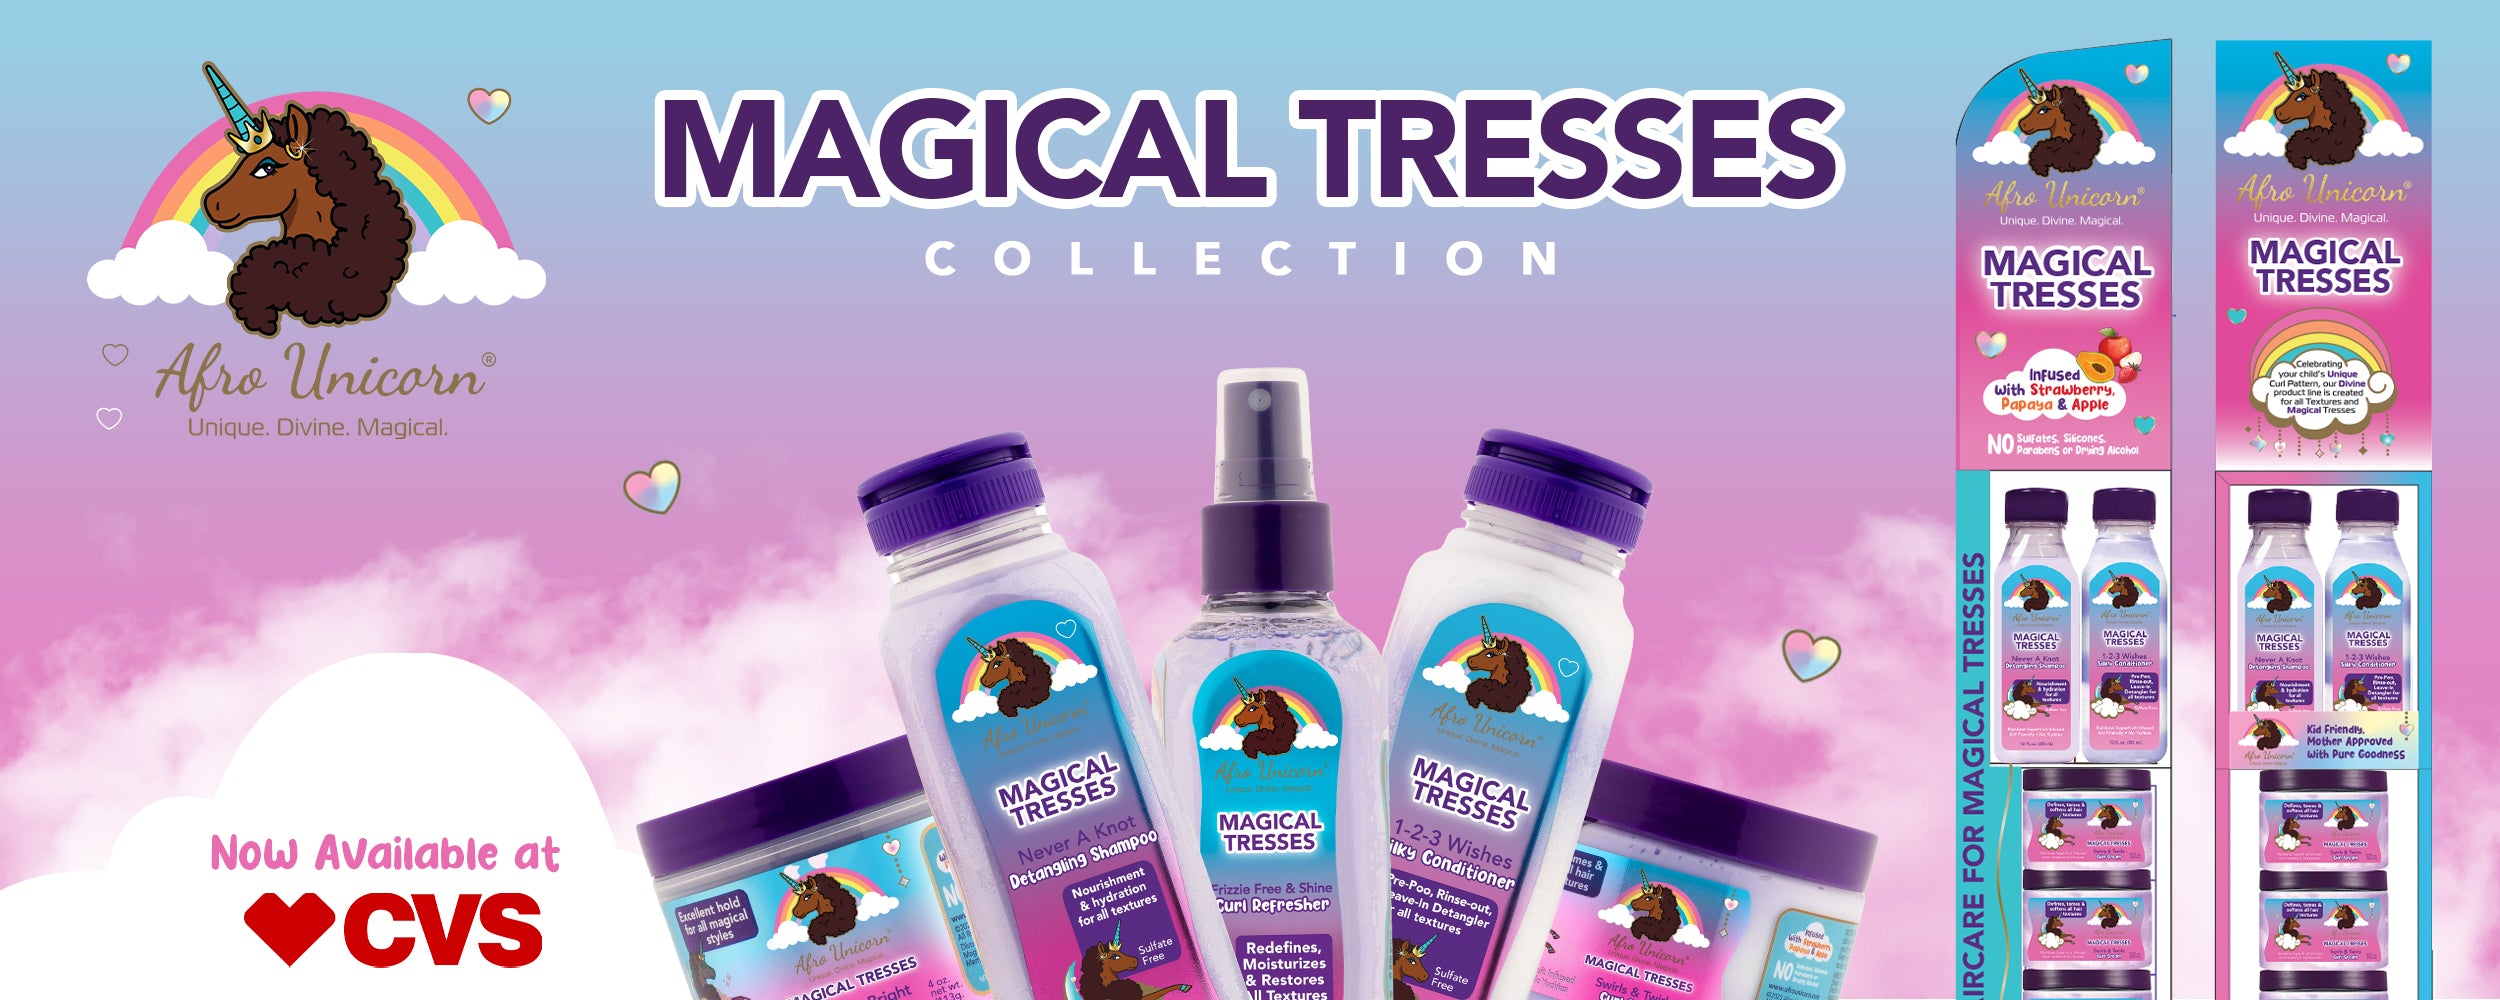 CVS banner image showing Afro Unicorn products.